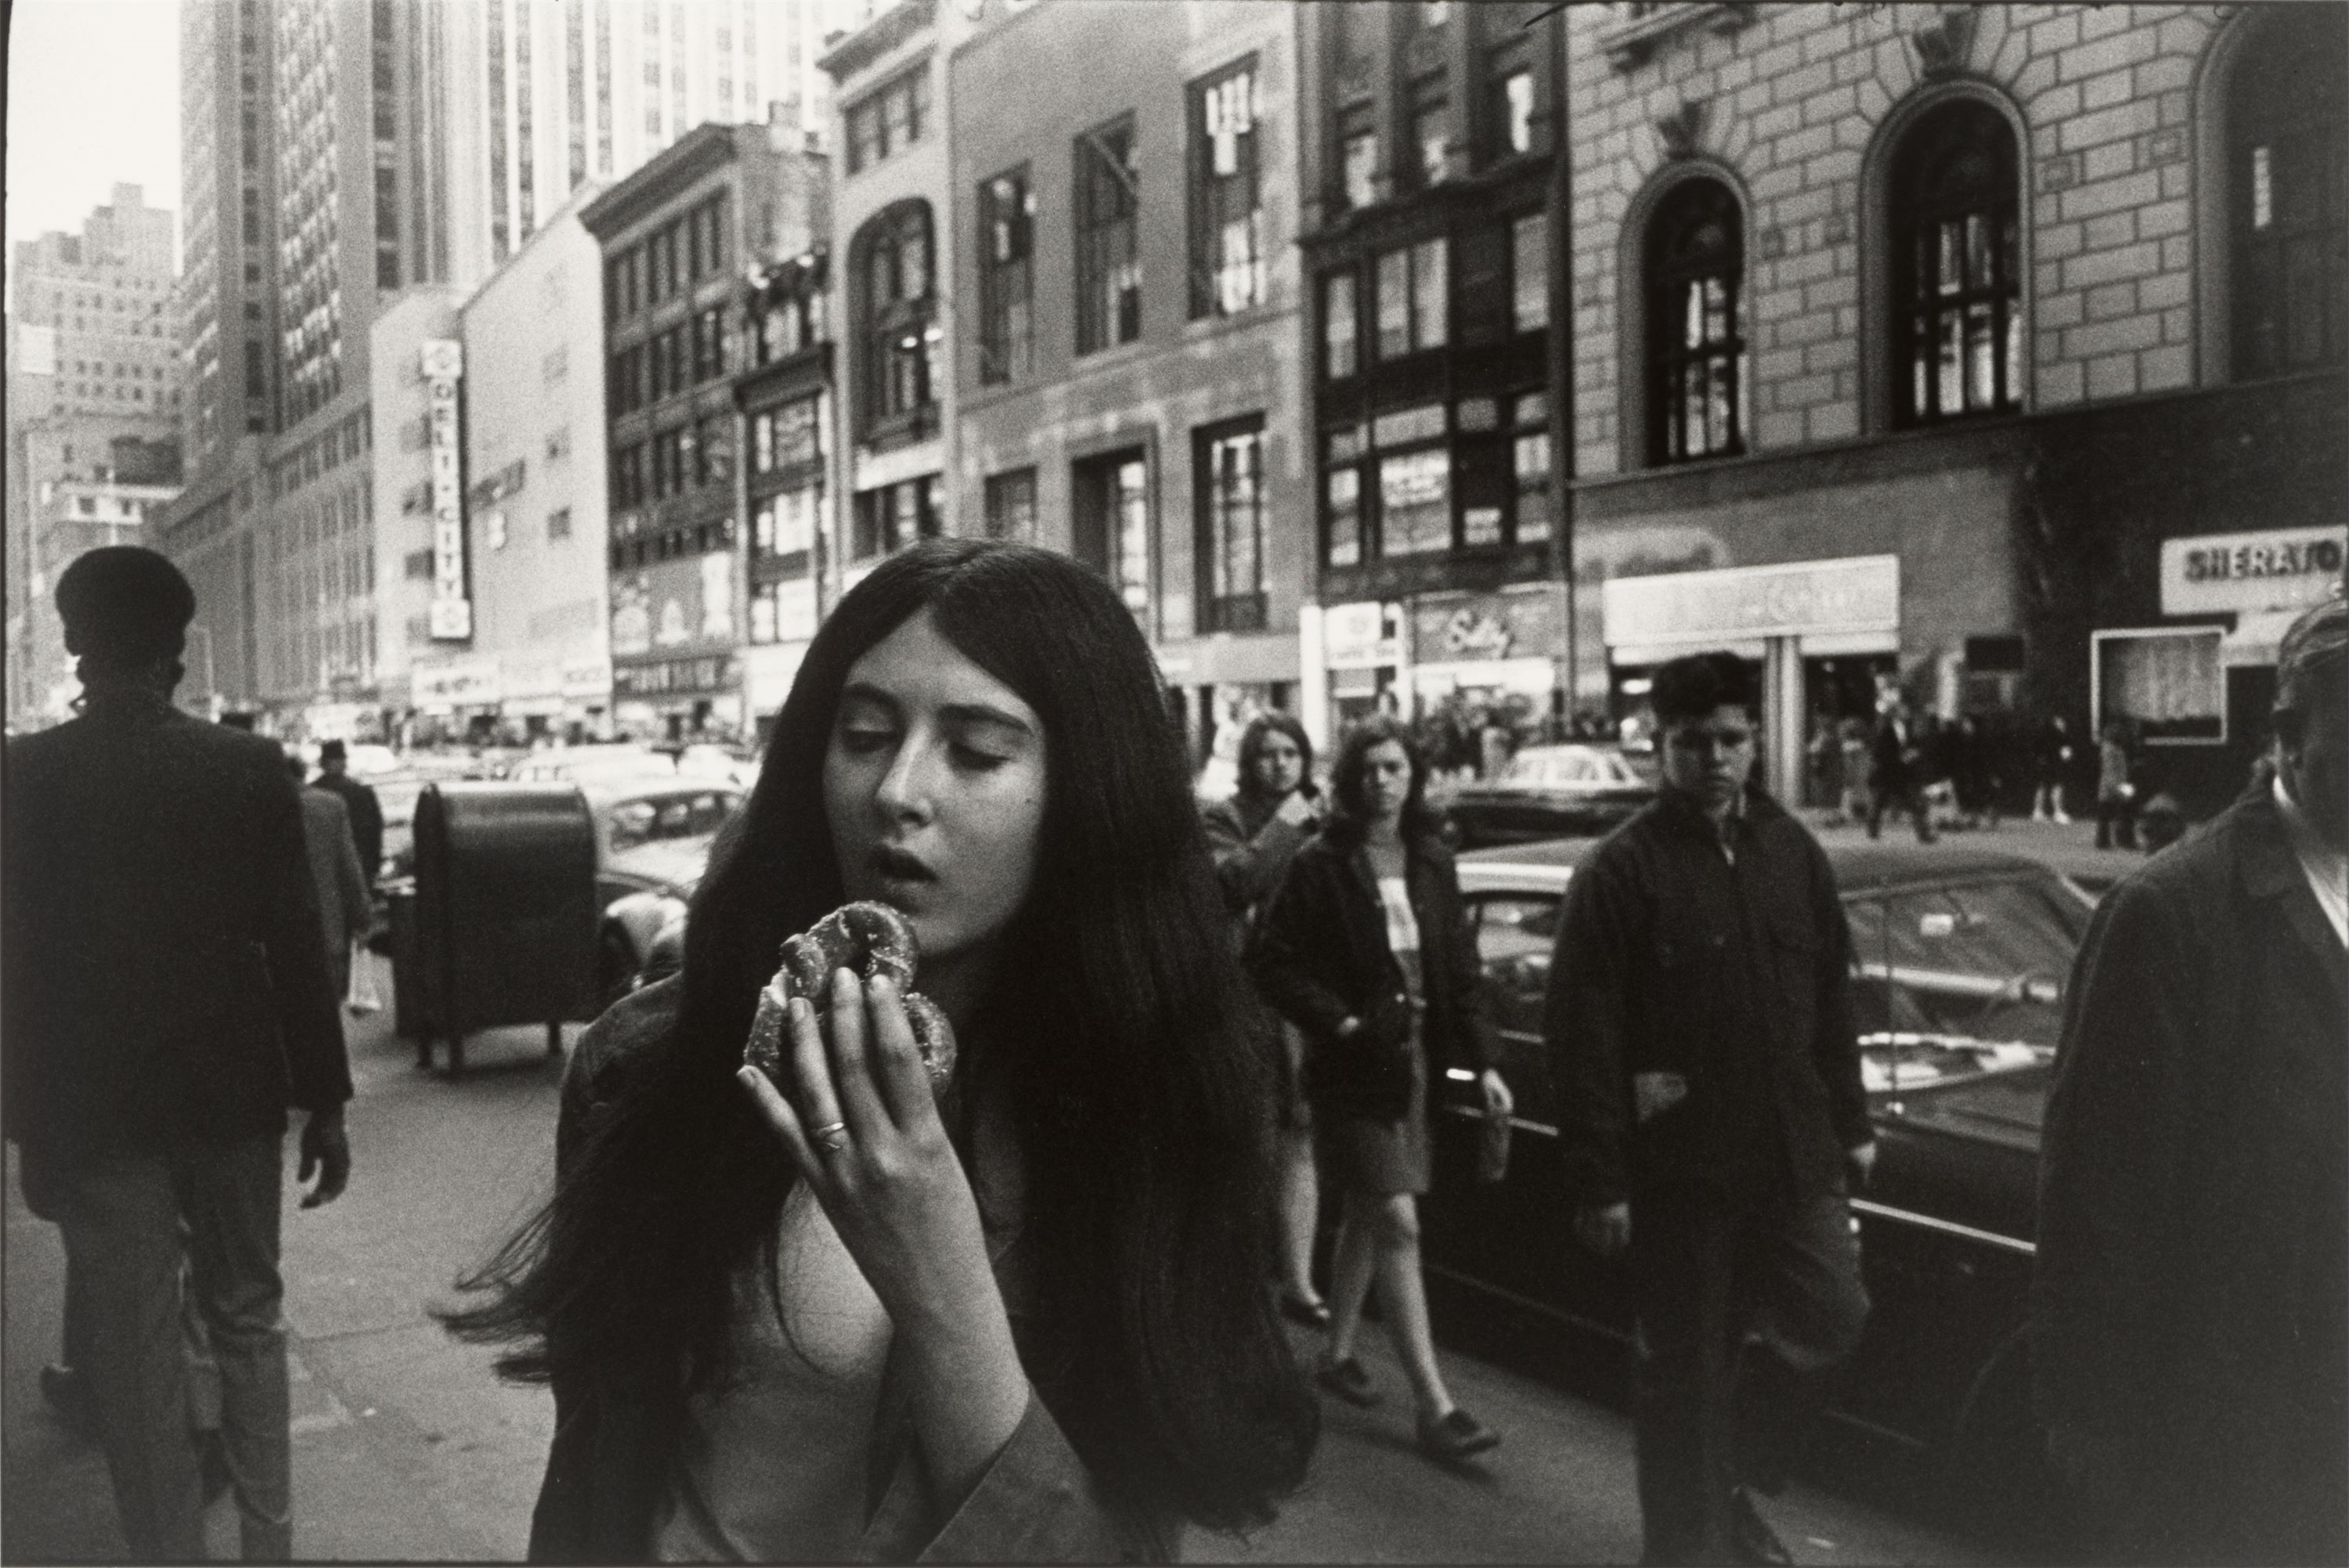 New York, from the series "Women are Beautiful”, 1960–1975. by Garry Winogrand, 1960–1975